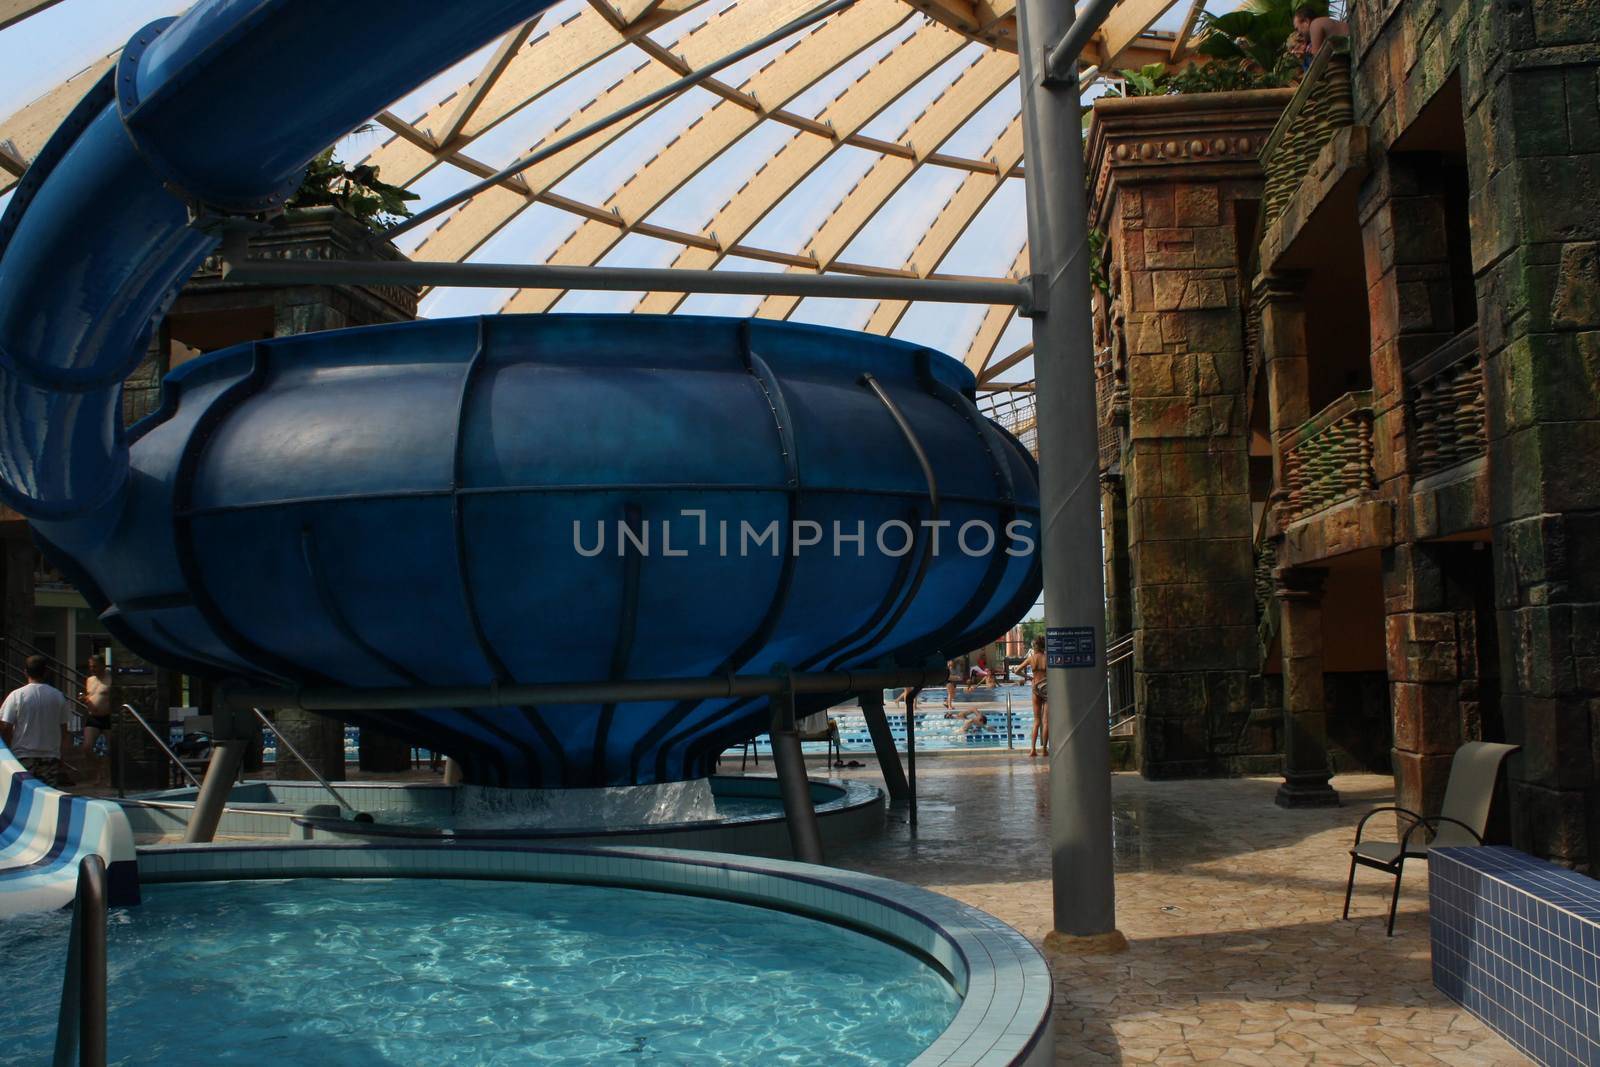 Huge blue slide and amazing interior architecture at Aquaticum in Budapest by balage941